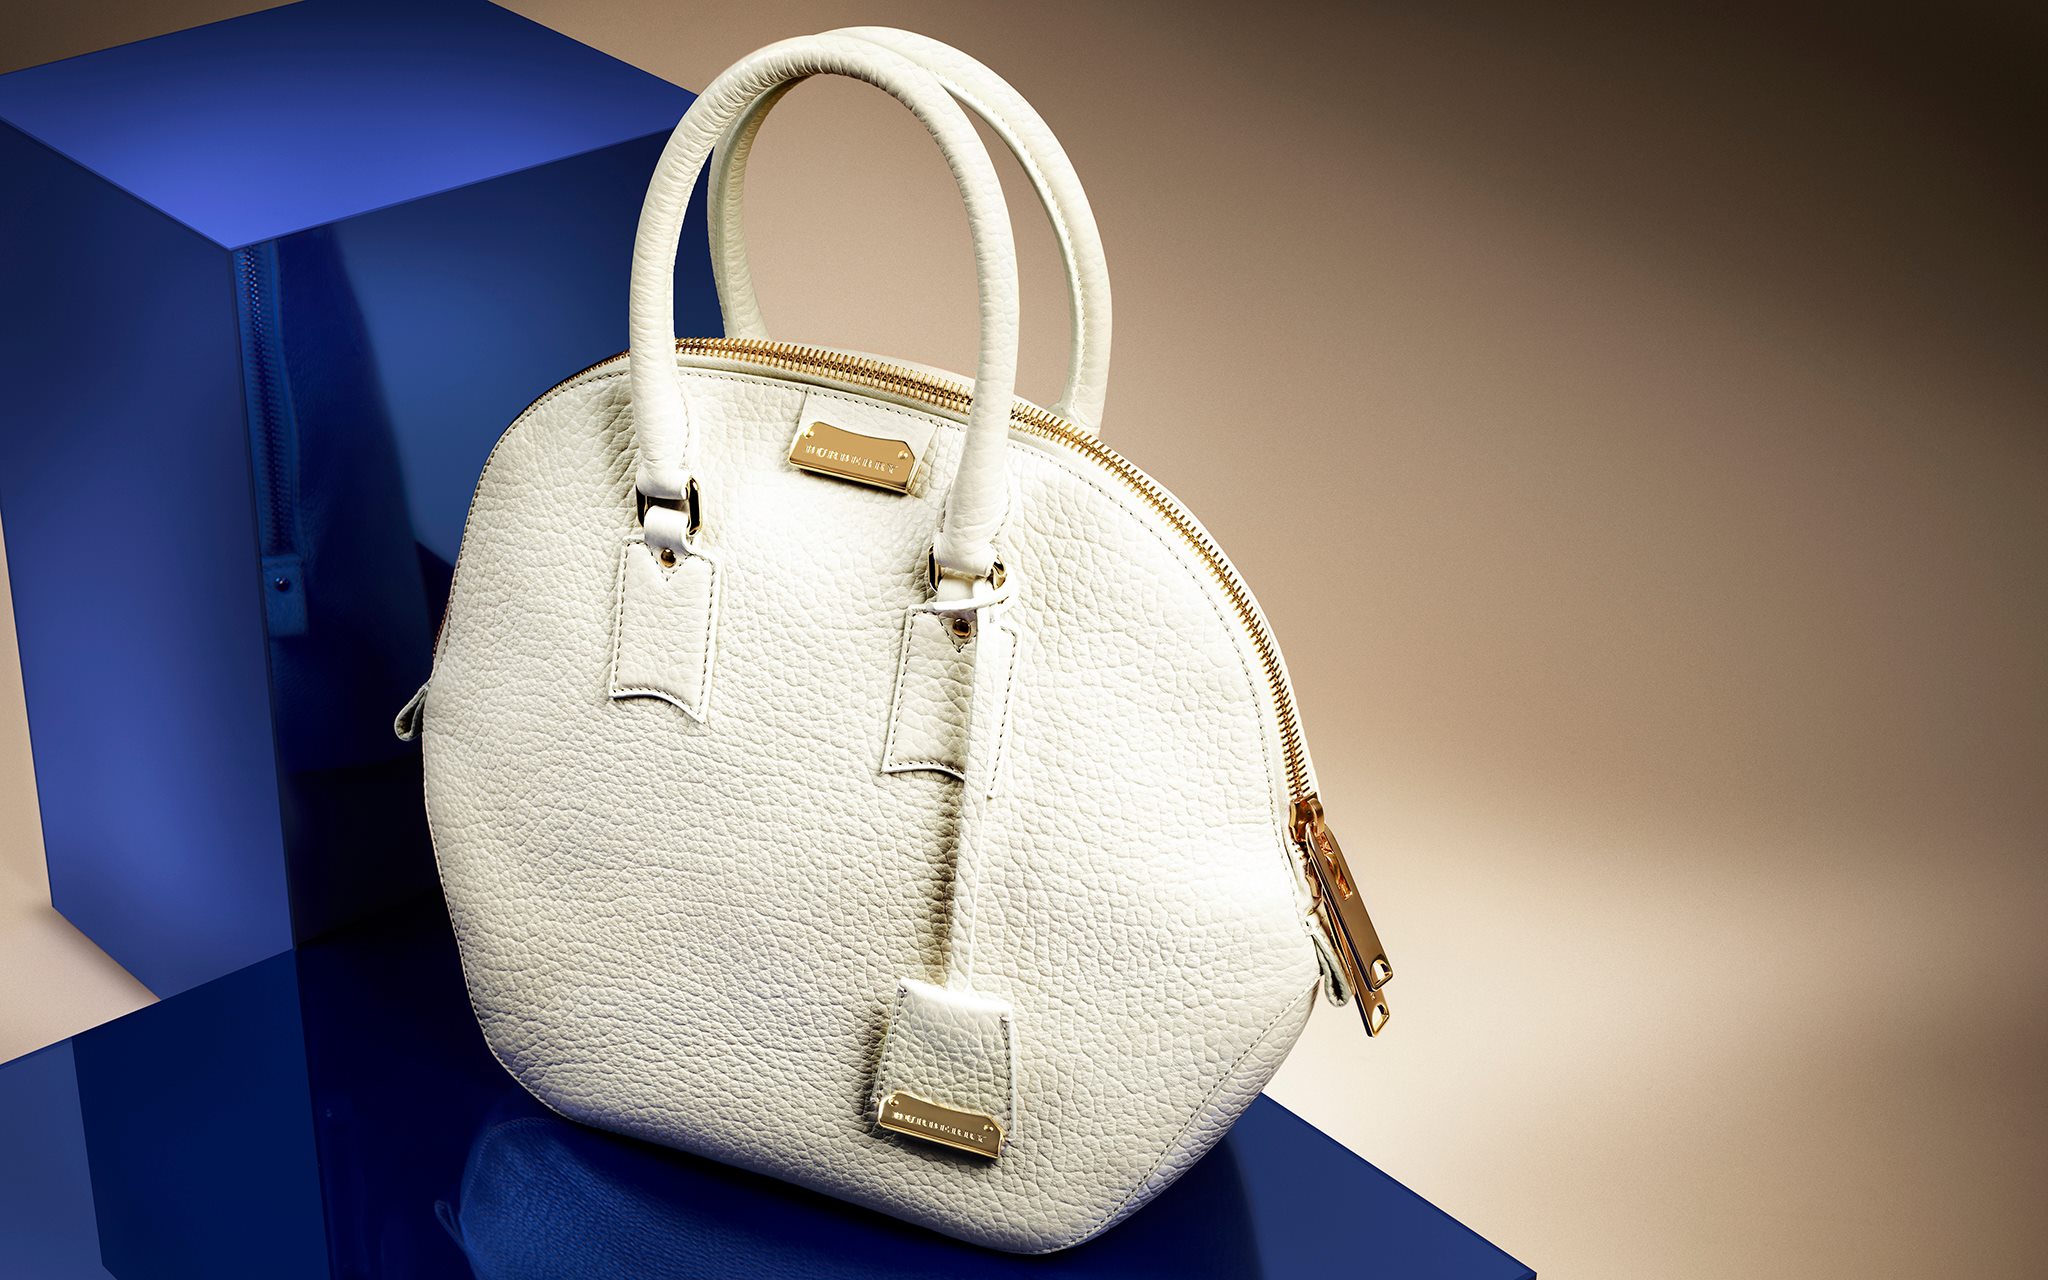 The Burberry Prorsum Spring/Summer 2013 Accessories Collection